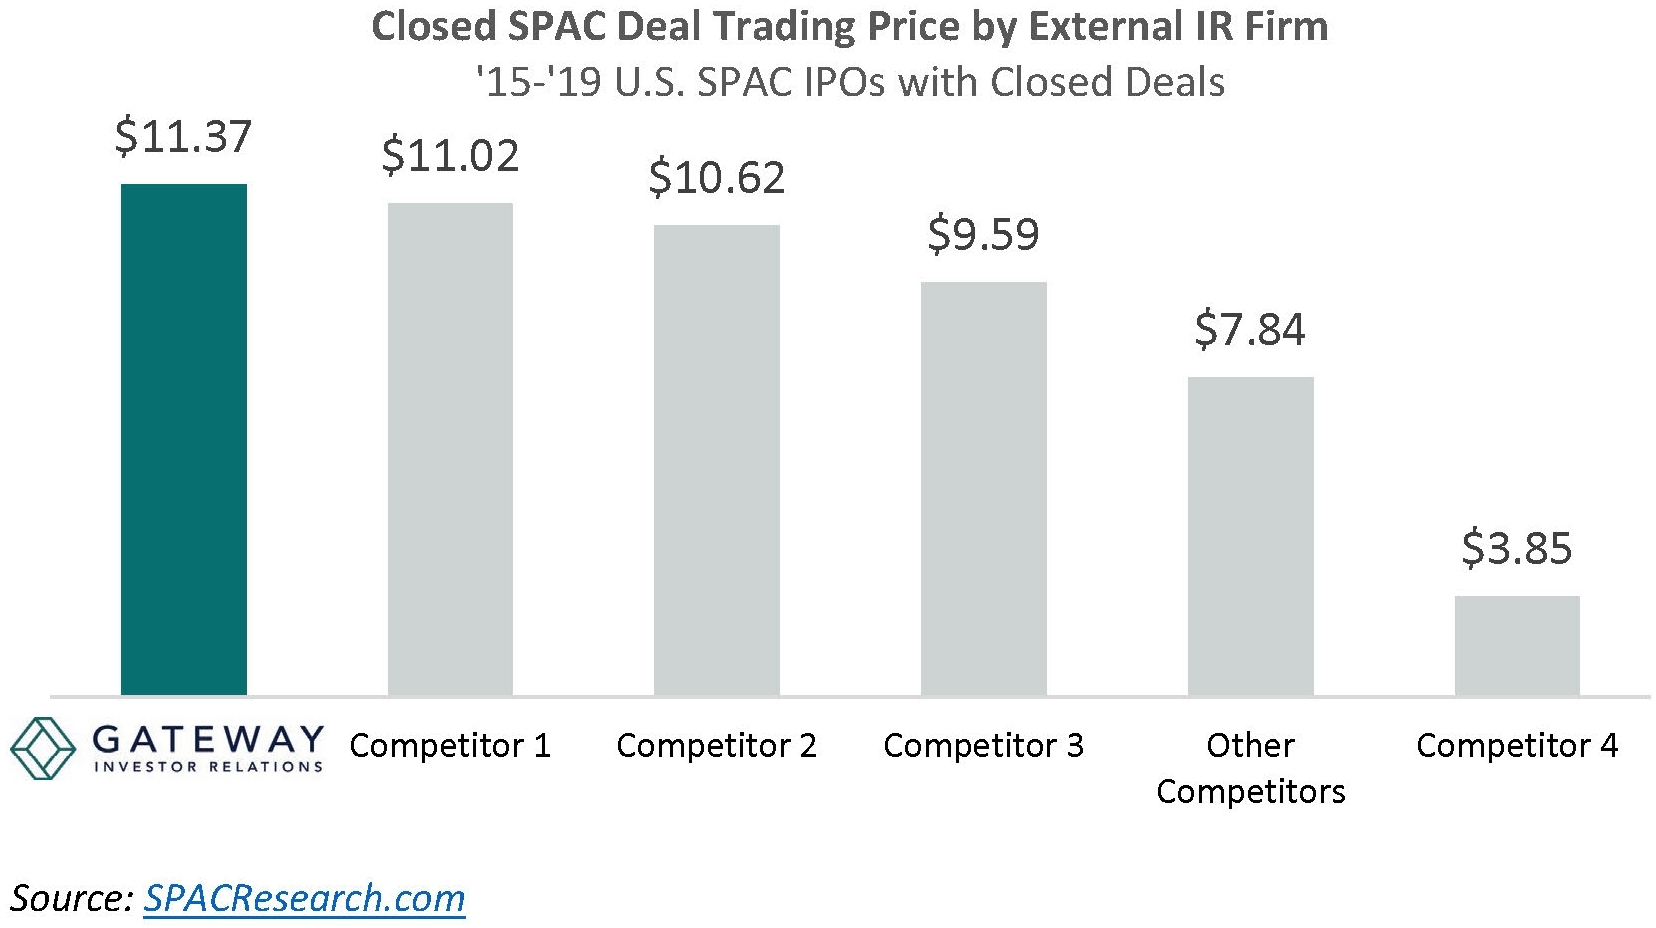 Closed SPAC Deal Trading Price by External IR Firm